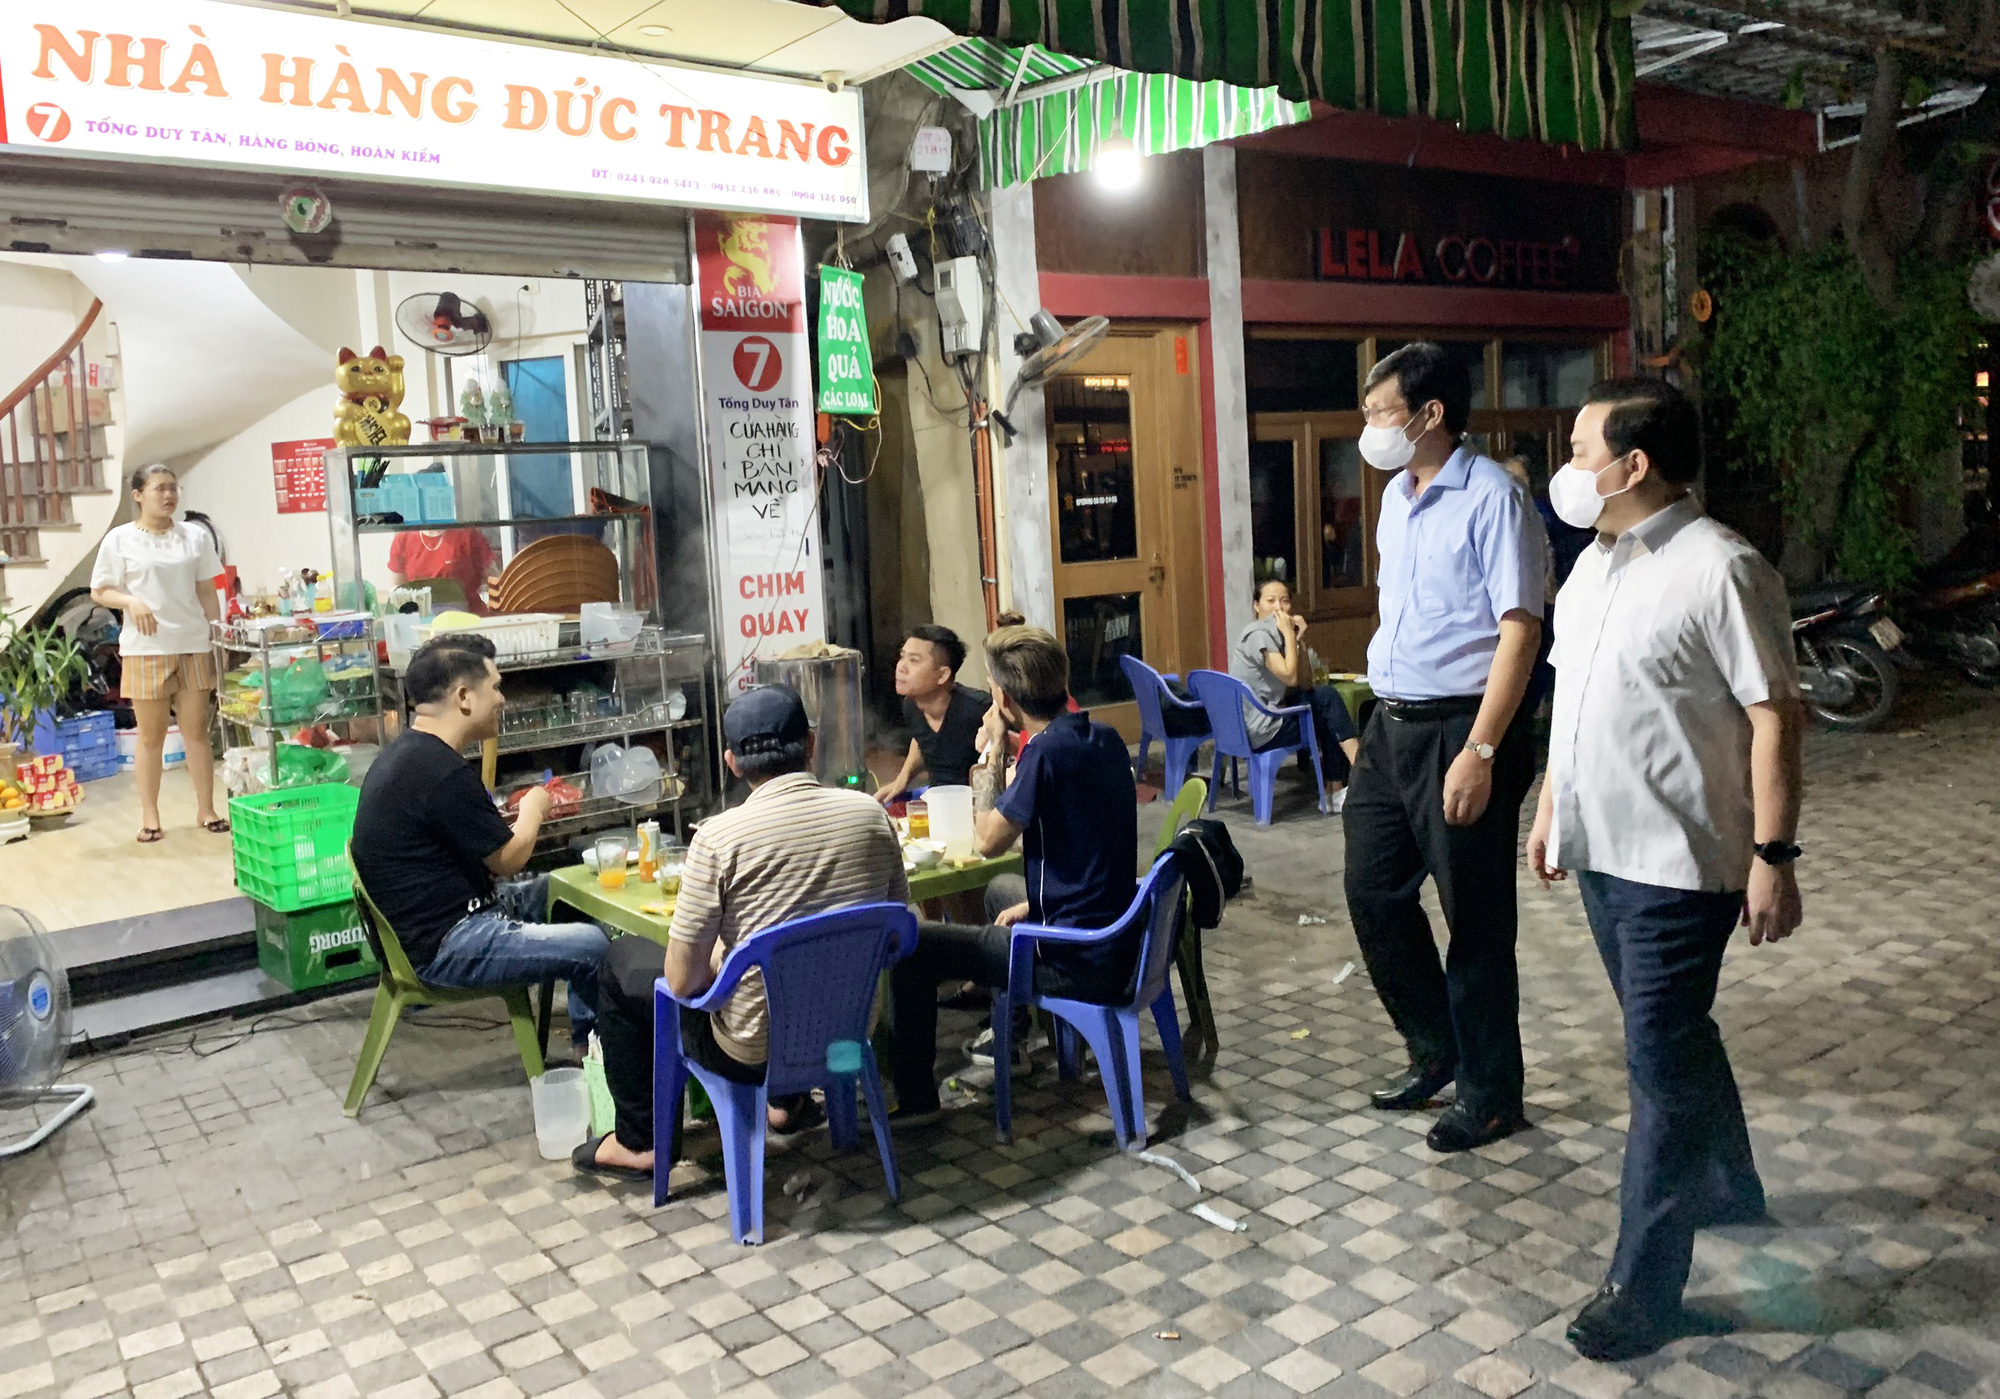 Hanoi detects five new local coronavirus cases after ten clear days